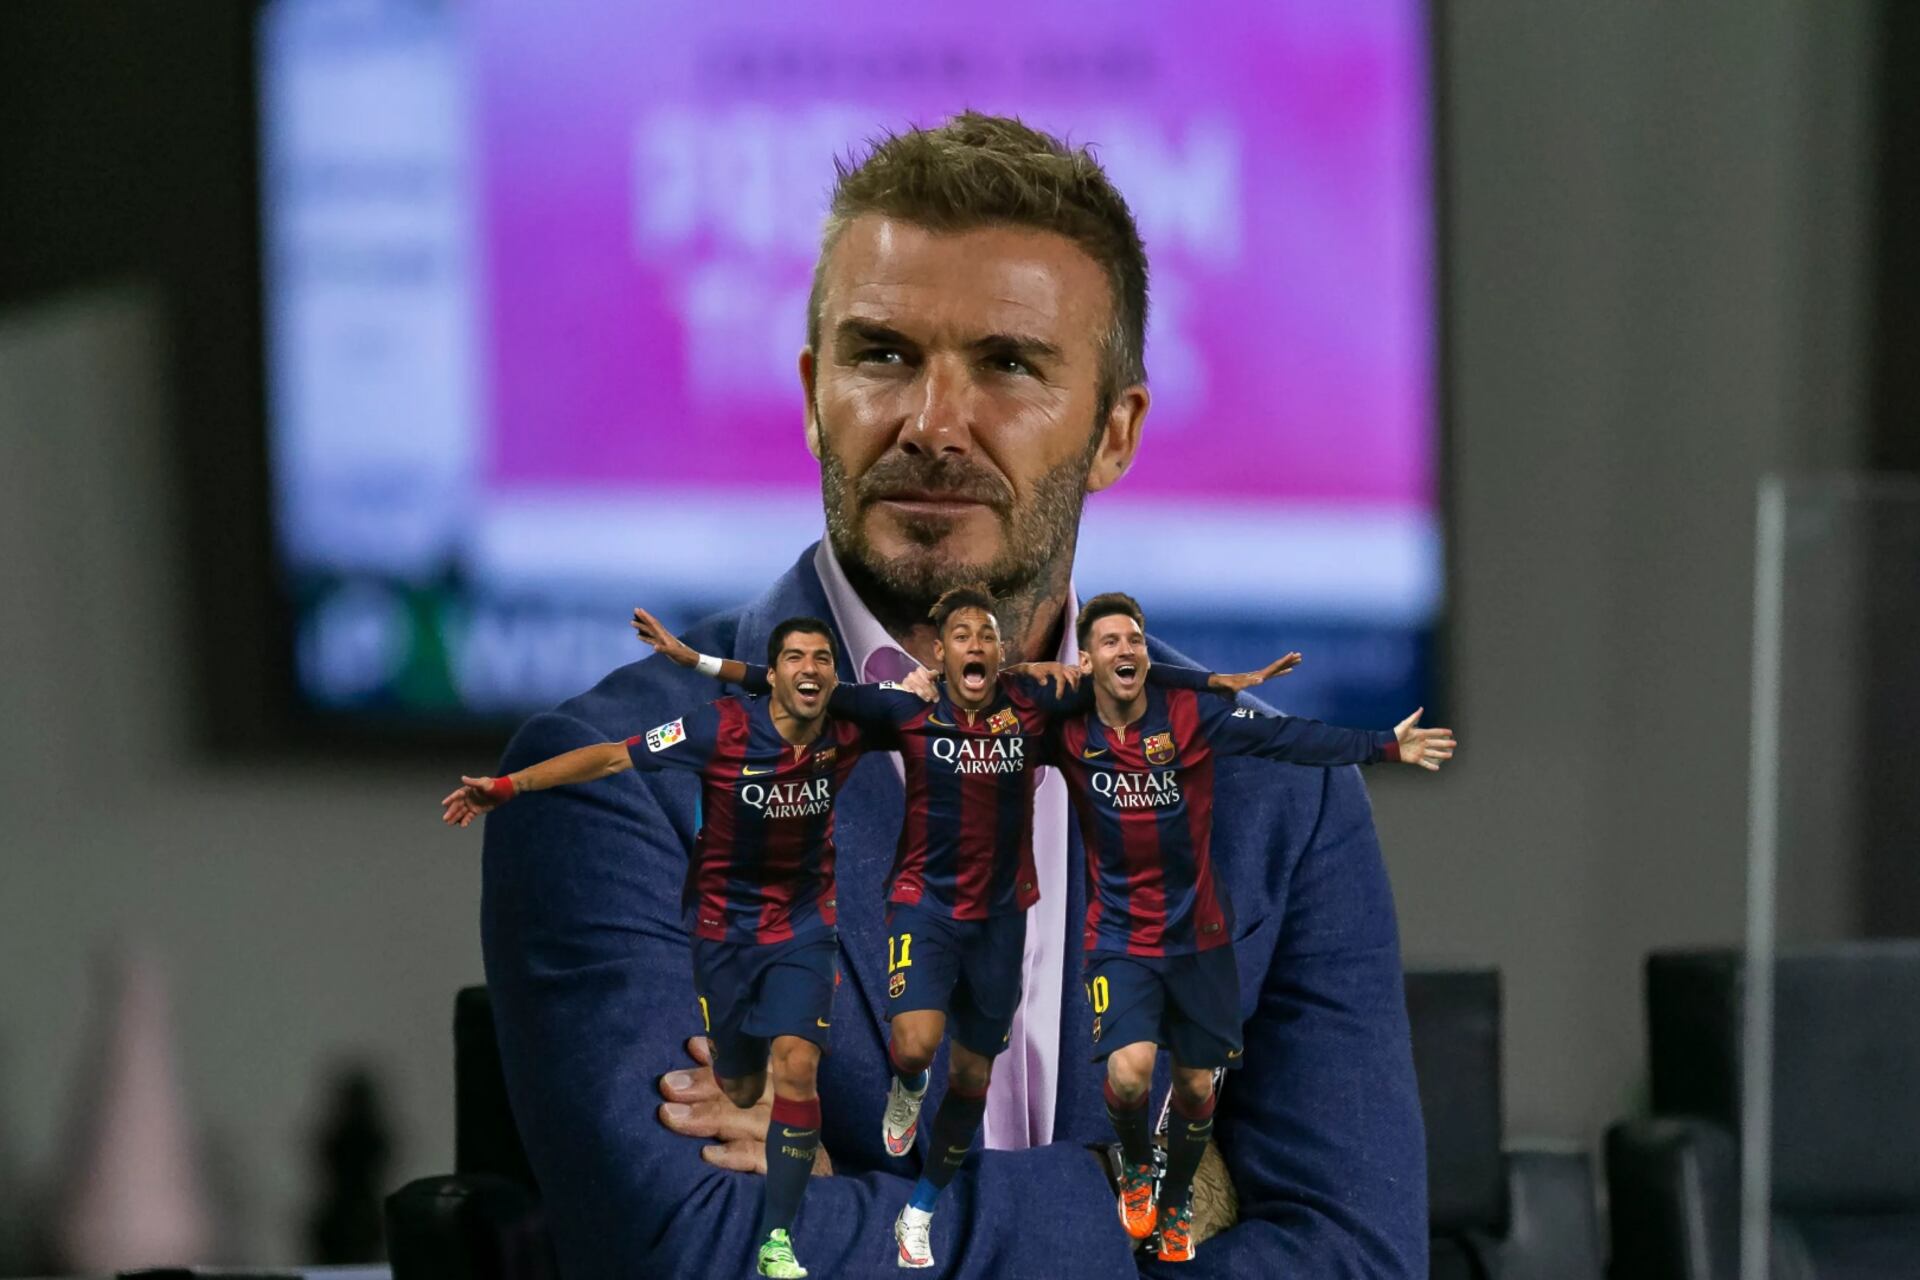 If Beckham wants to bring Neymar for the MSN at Inter Miami, the obstacle he must overcome and it's not about the money